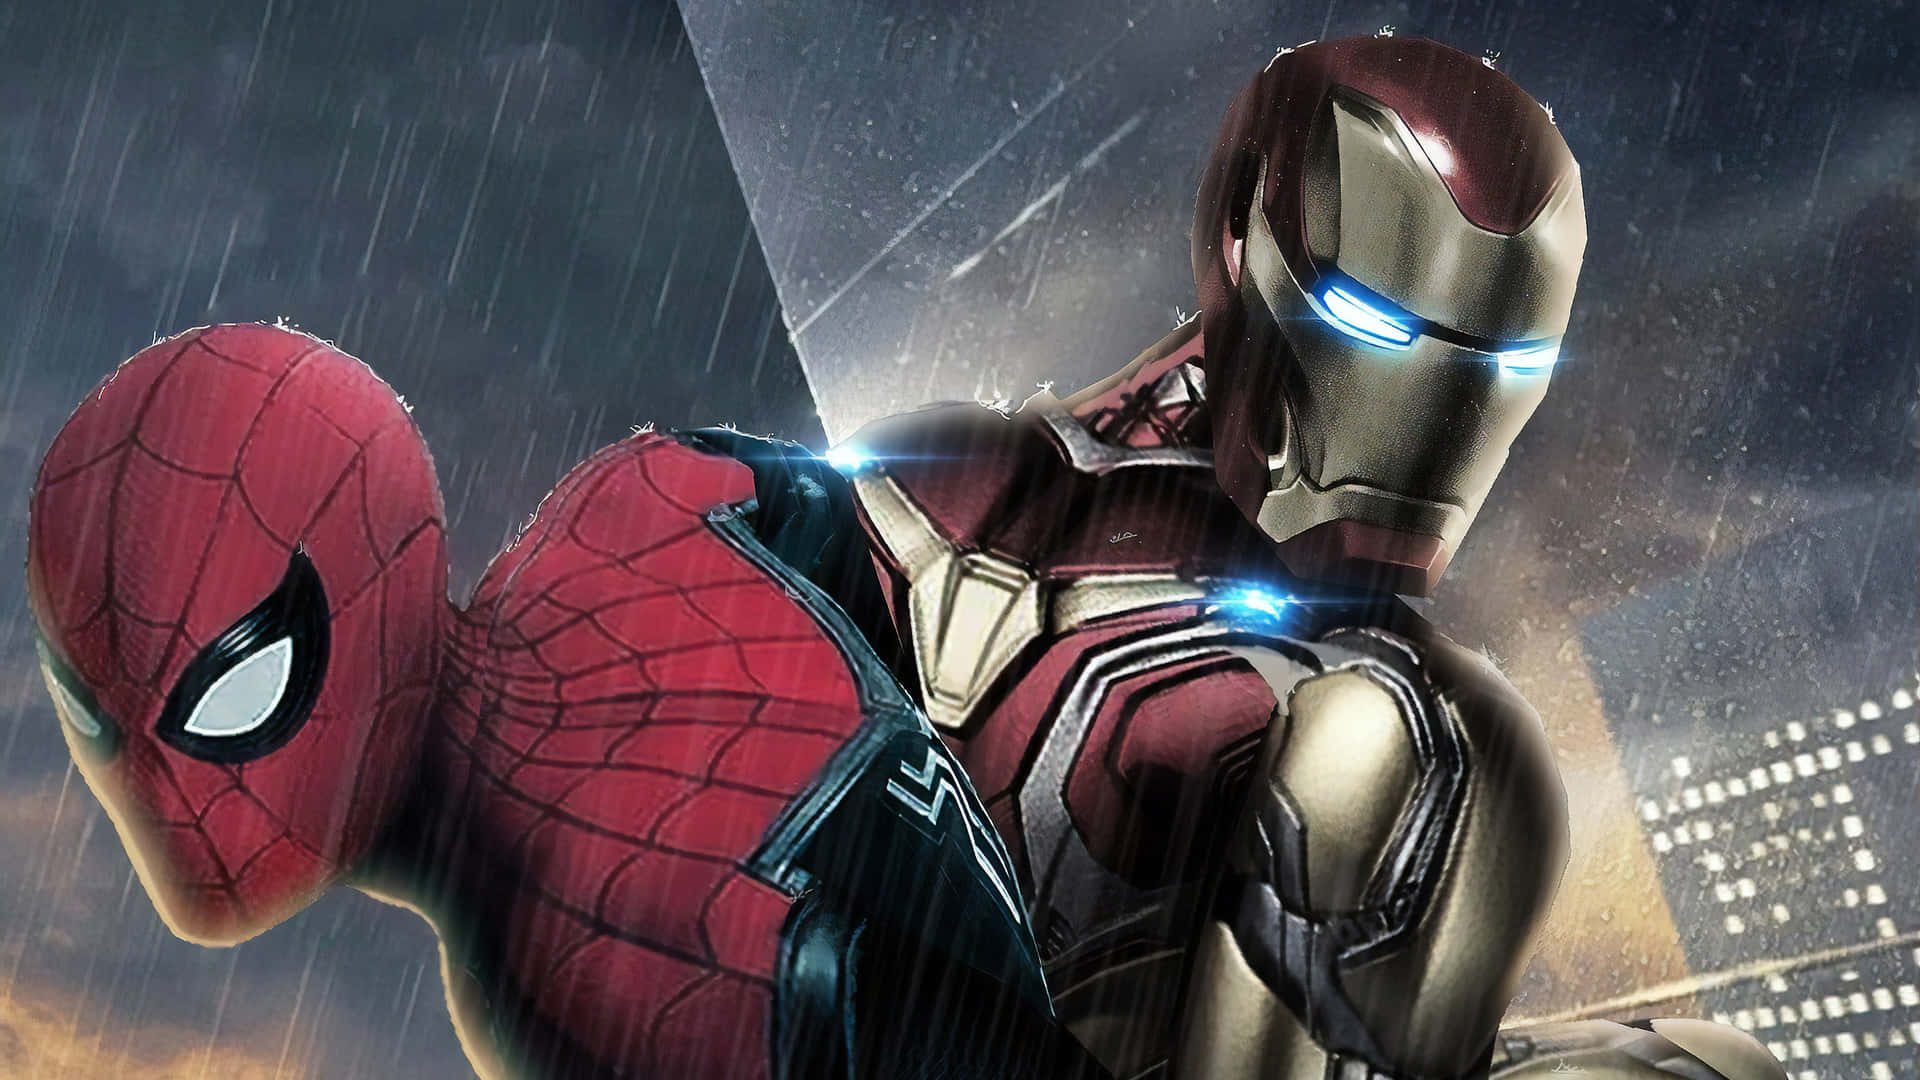 The superhero duo Spider Man and Iron Man protect the city together Wallpaper